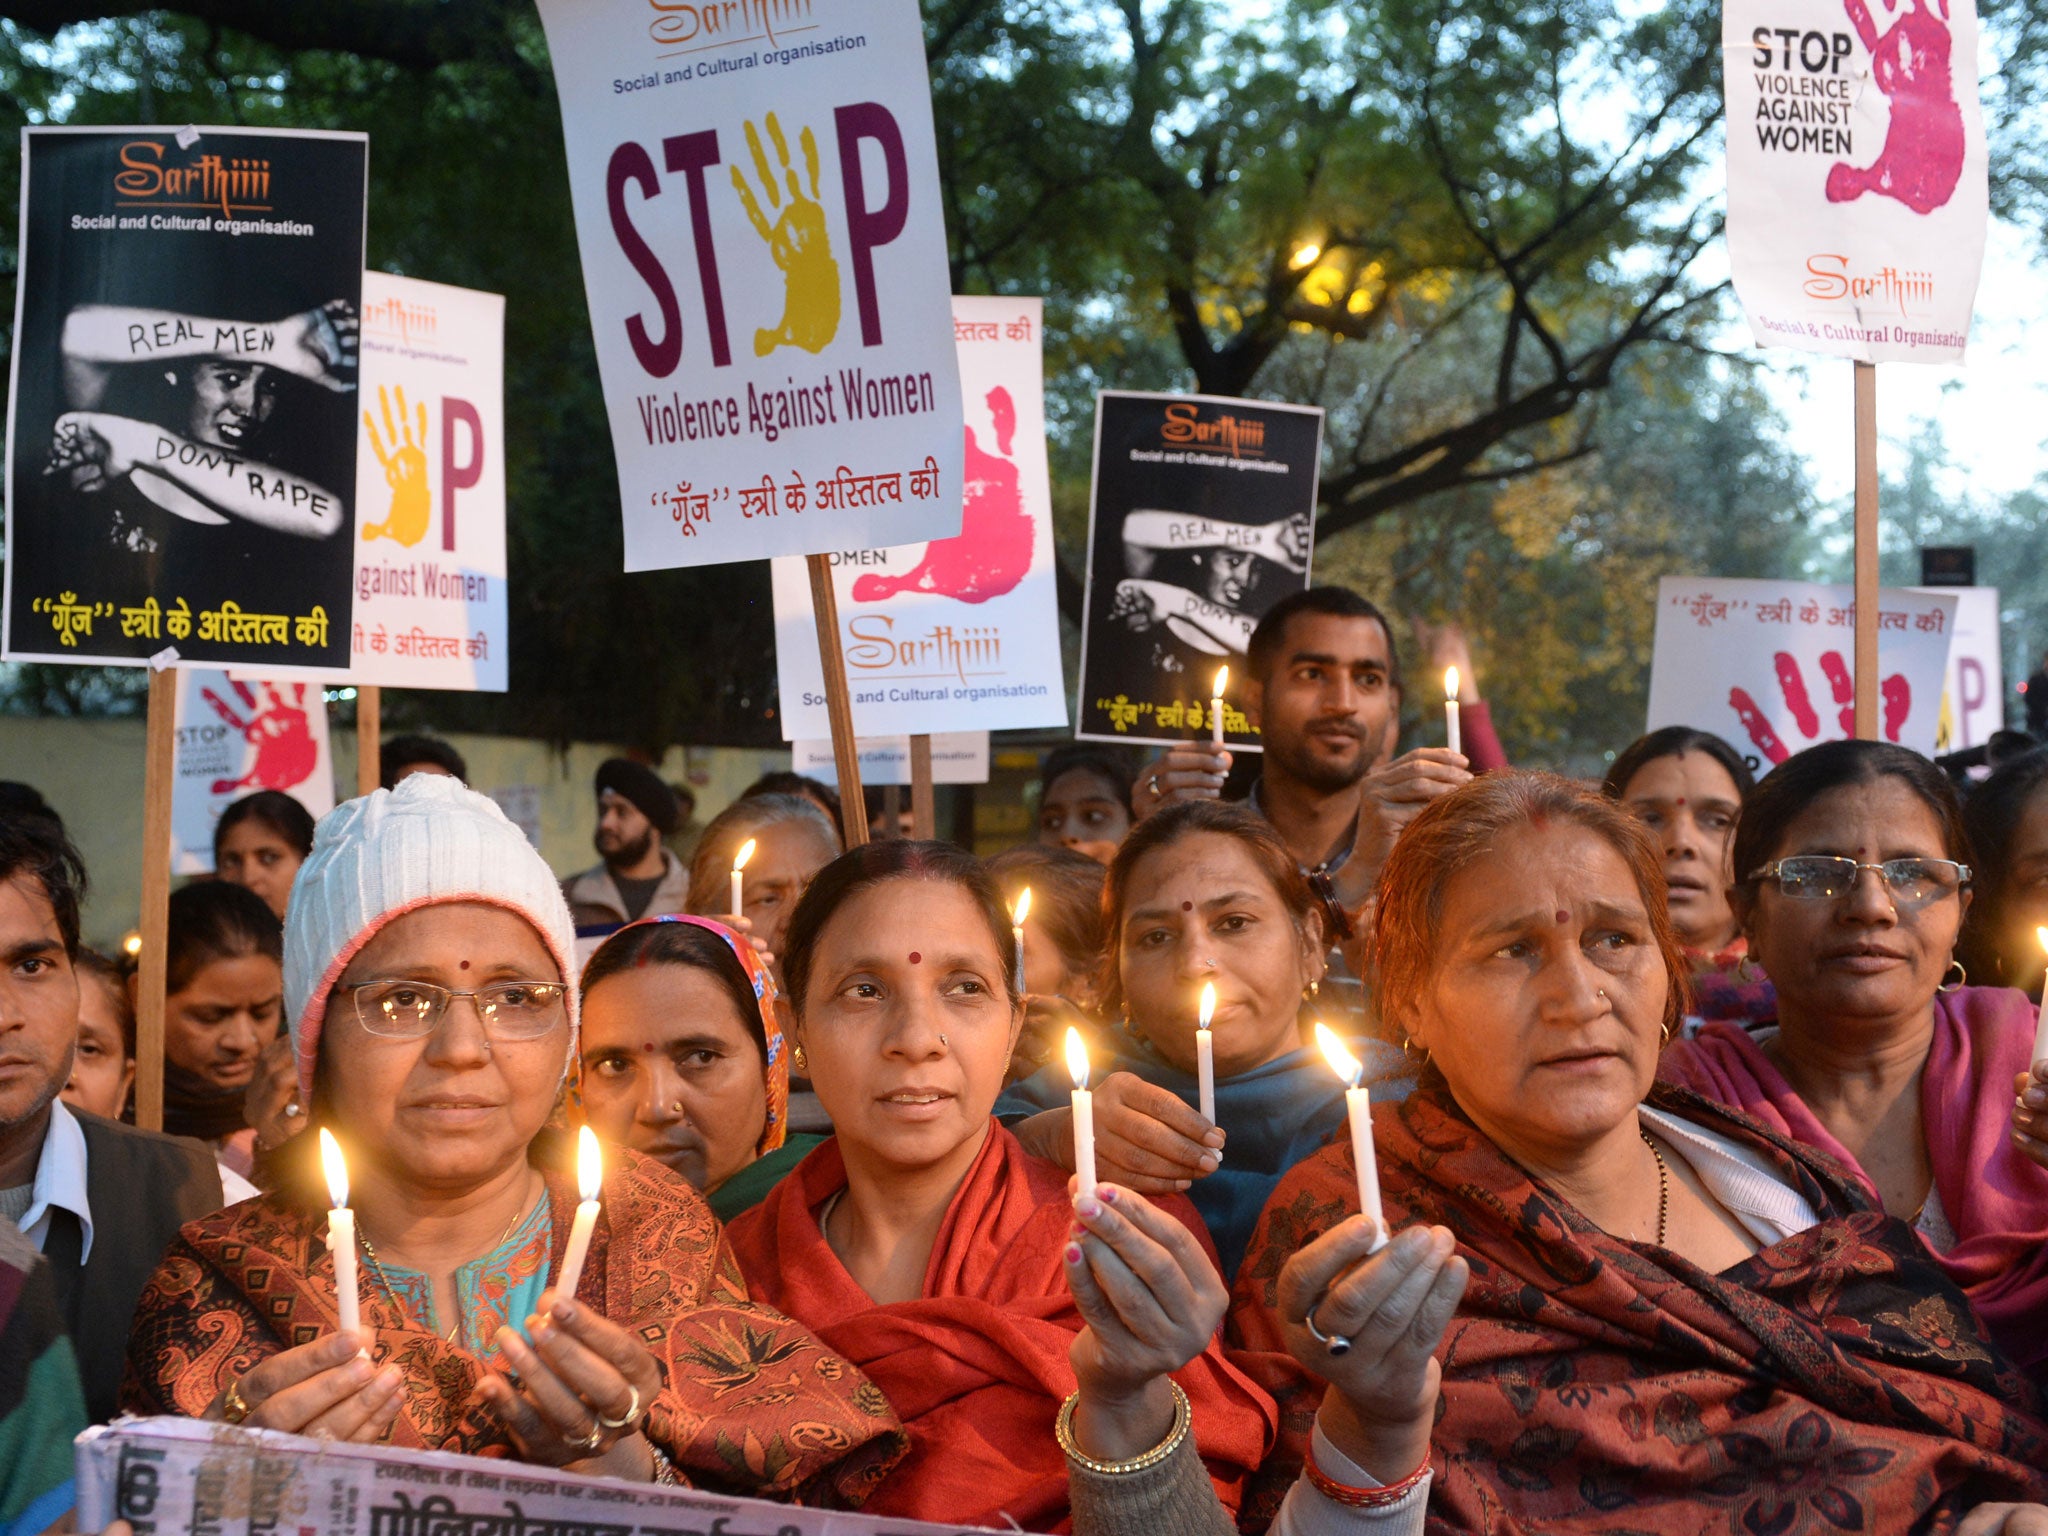 Official figures for the number of women raped in India are often disputed by Women's Rights experts who claim the numbers are far higher